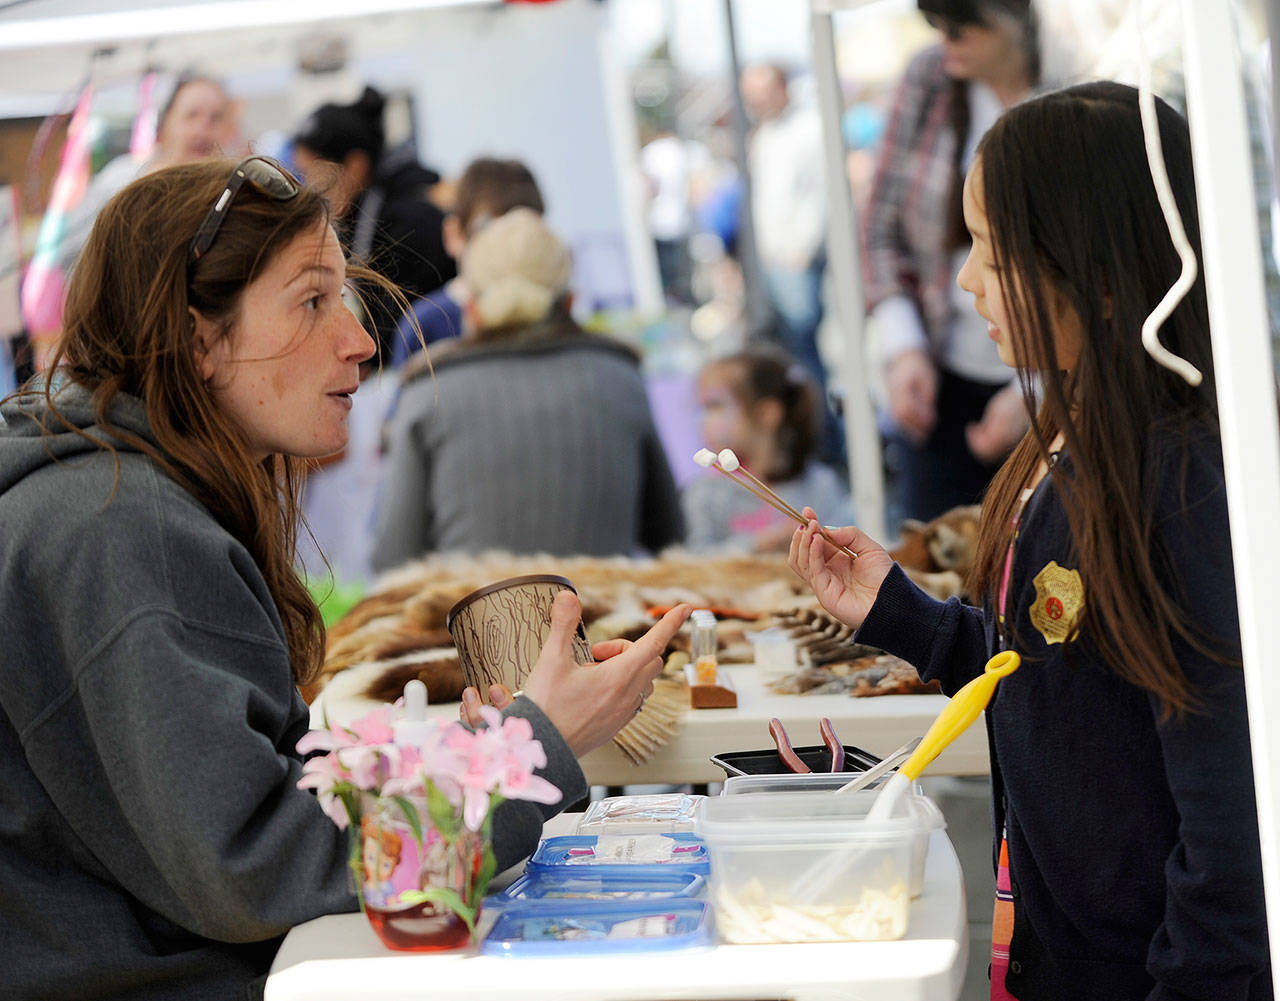 Jenna Ziogas, education coordinator at the Dungeness River Audubon Center, talks about birds’ beaks with Elyse Kim of Sequim at the 2017 Family Fun Day in this file photo. The event will be from 9 a.m. to 4 p.m. on Washington Street on Saturday. (Michael Dashiell/Olympic Peninsula News Group)